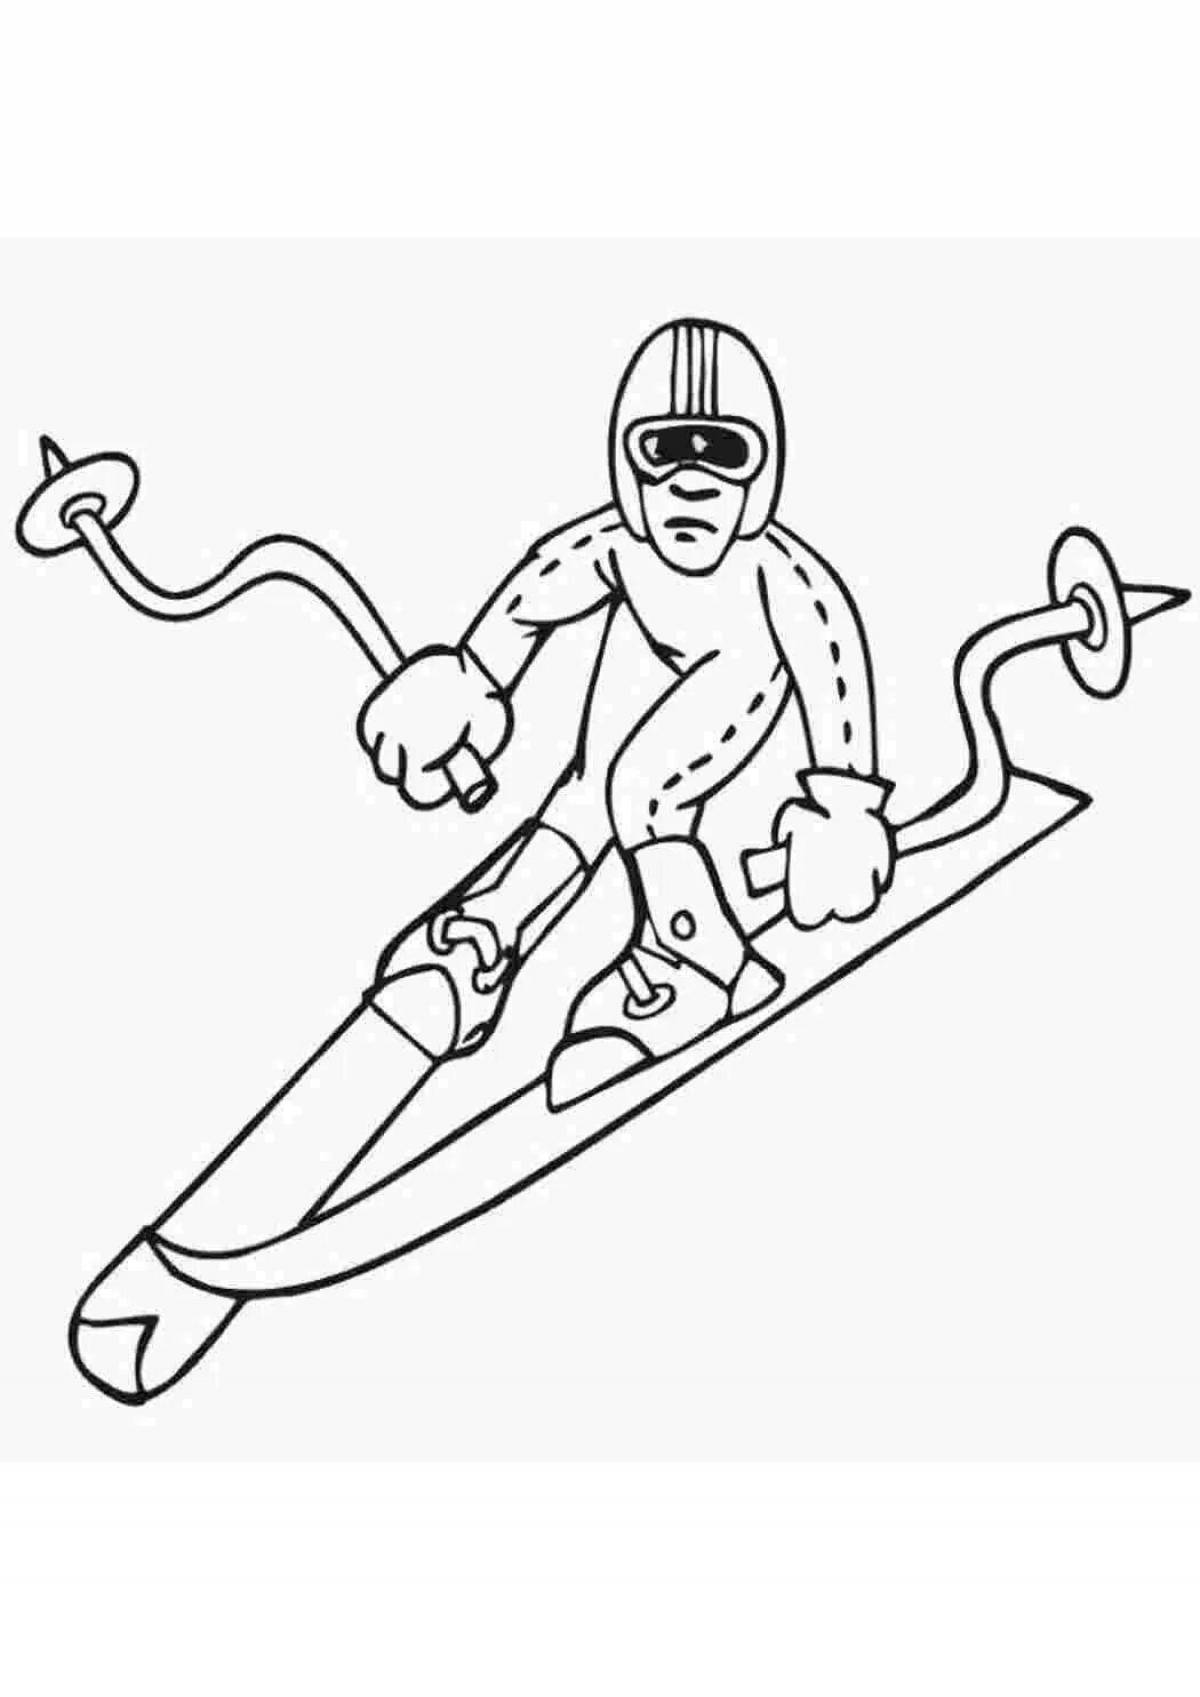 Coloring book playful skier